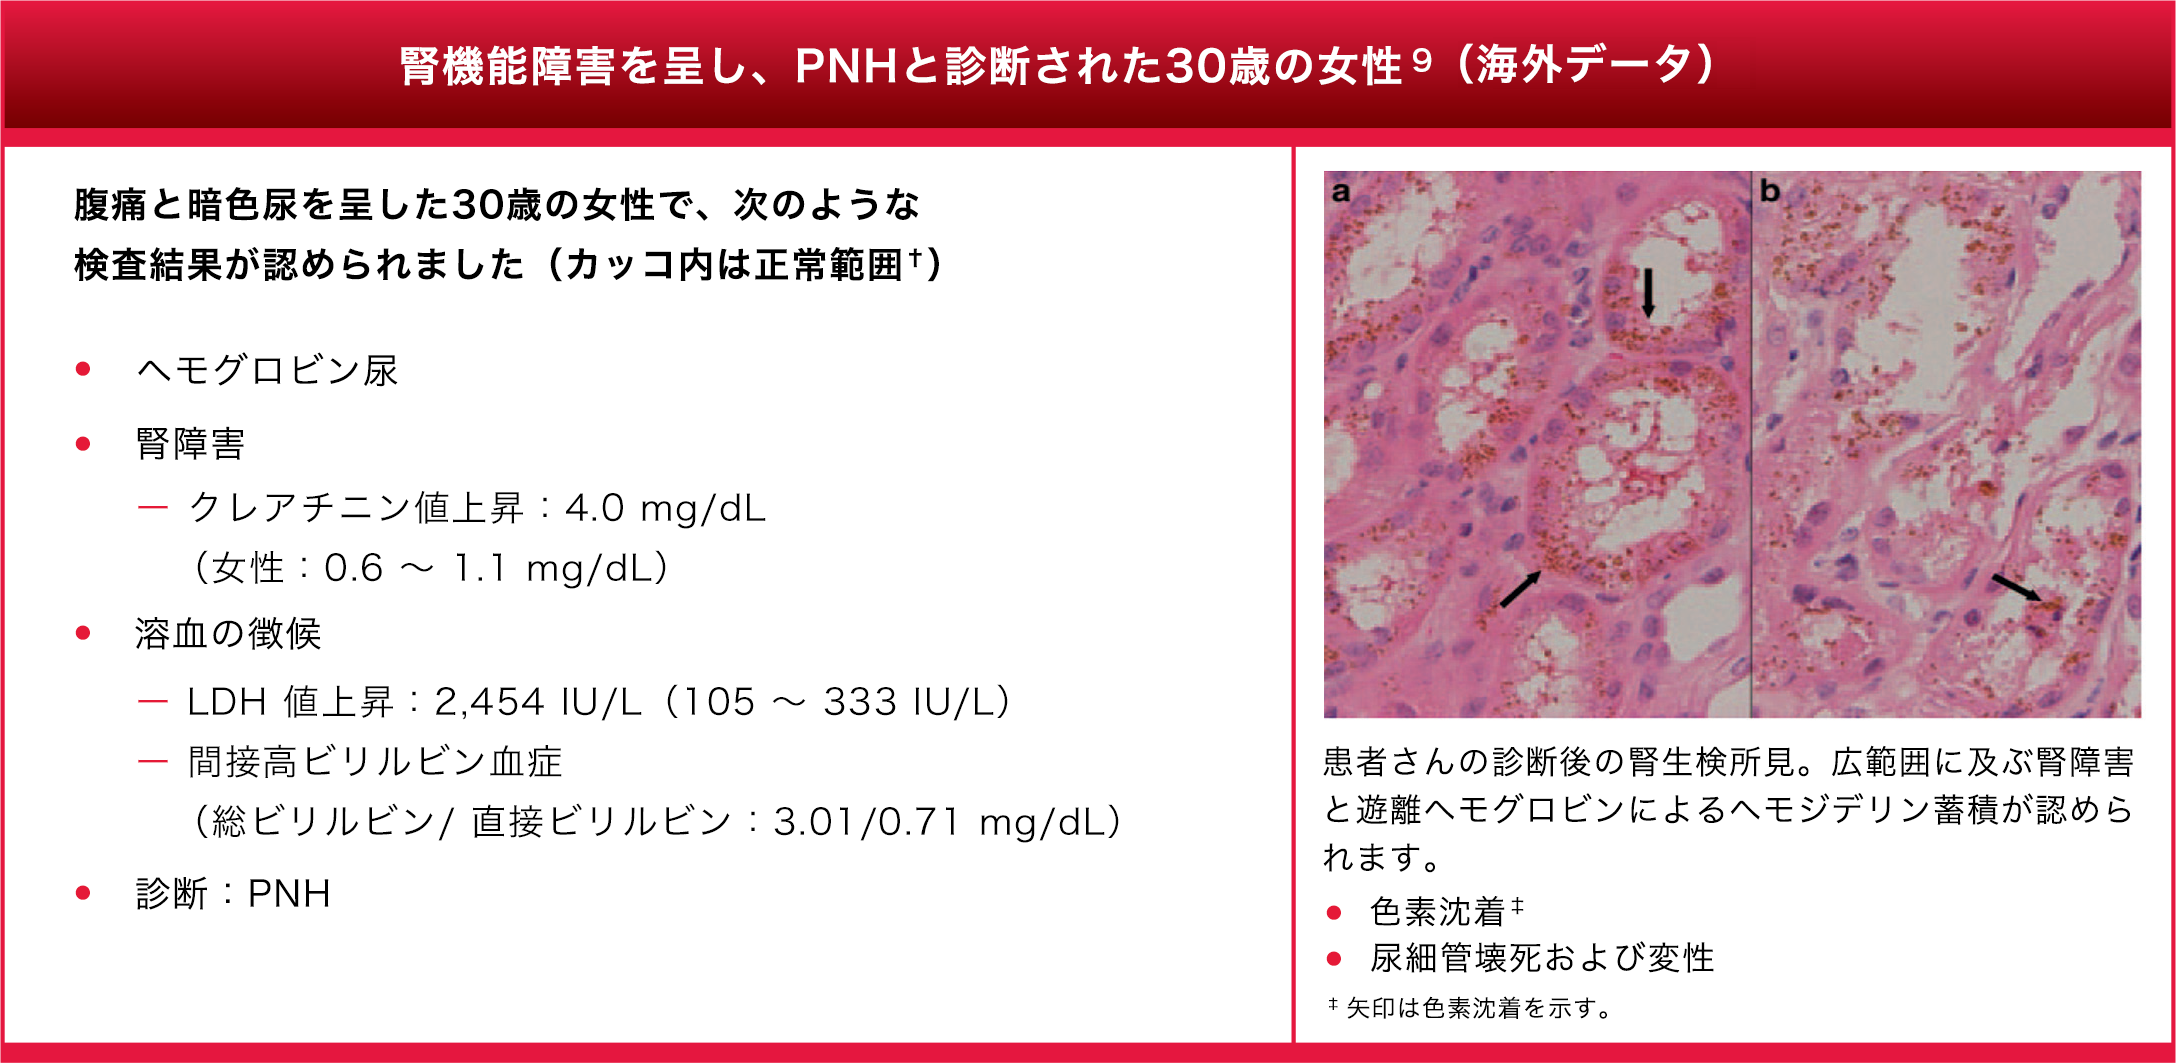 30-year-old woman presenting with renal dysfunction and diagnosed with PNH*34